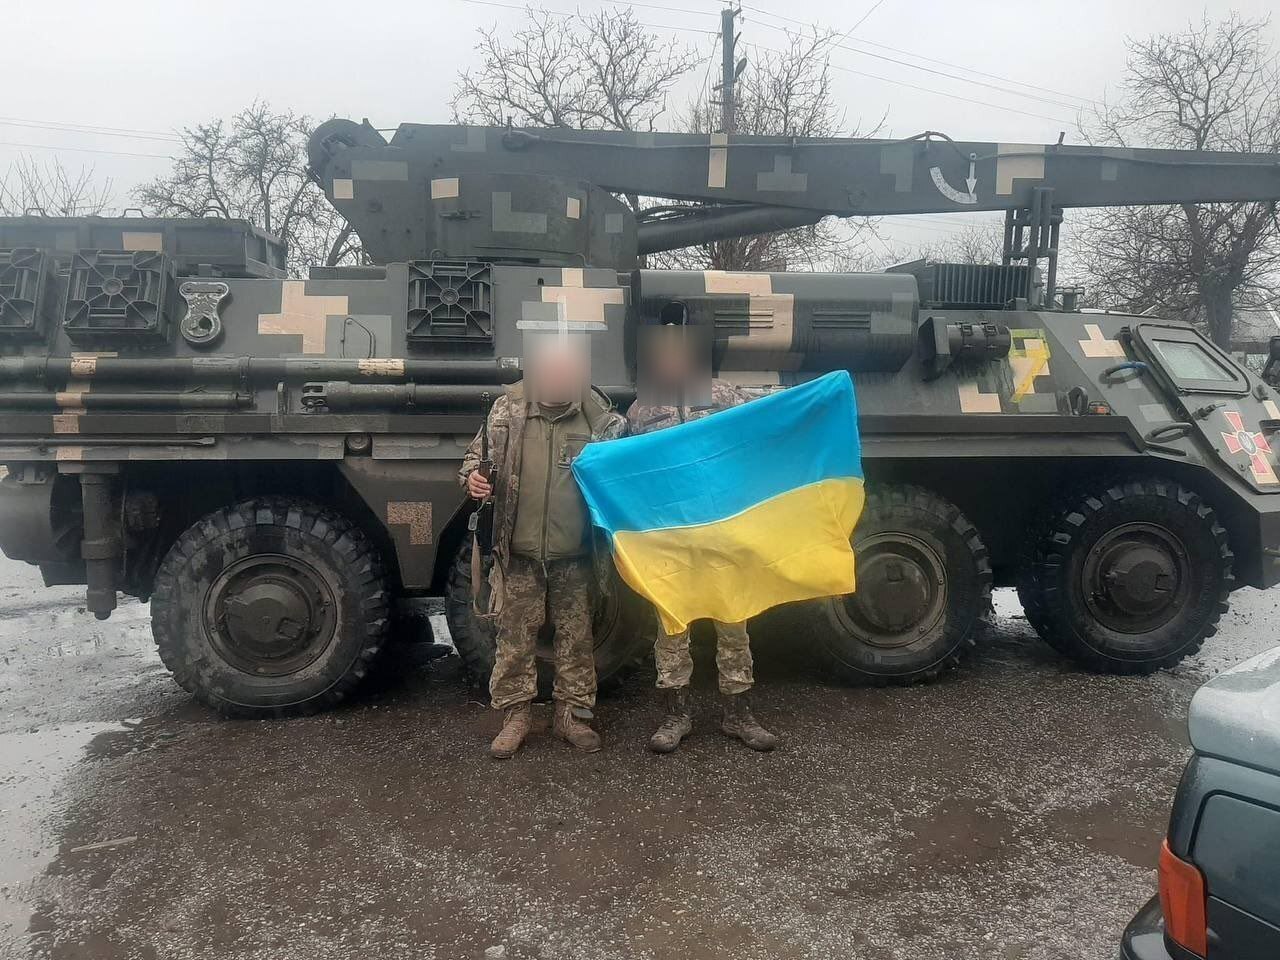 Ukrainian soldiers and a BREM-4 inthe background, spring 2023